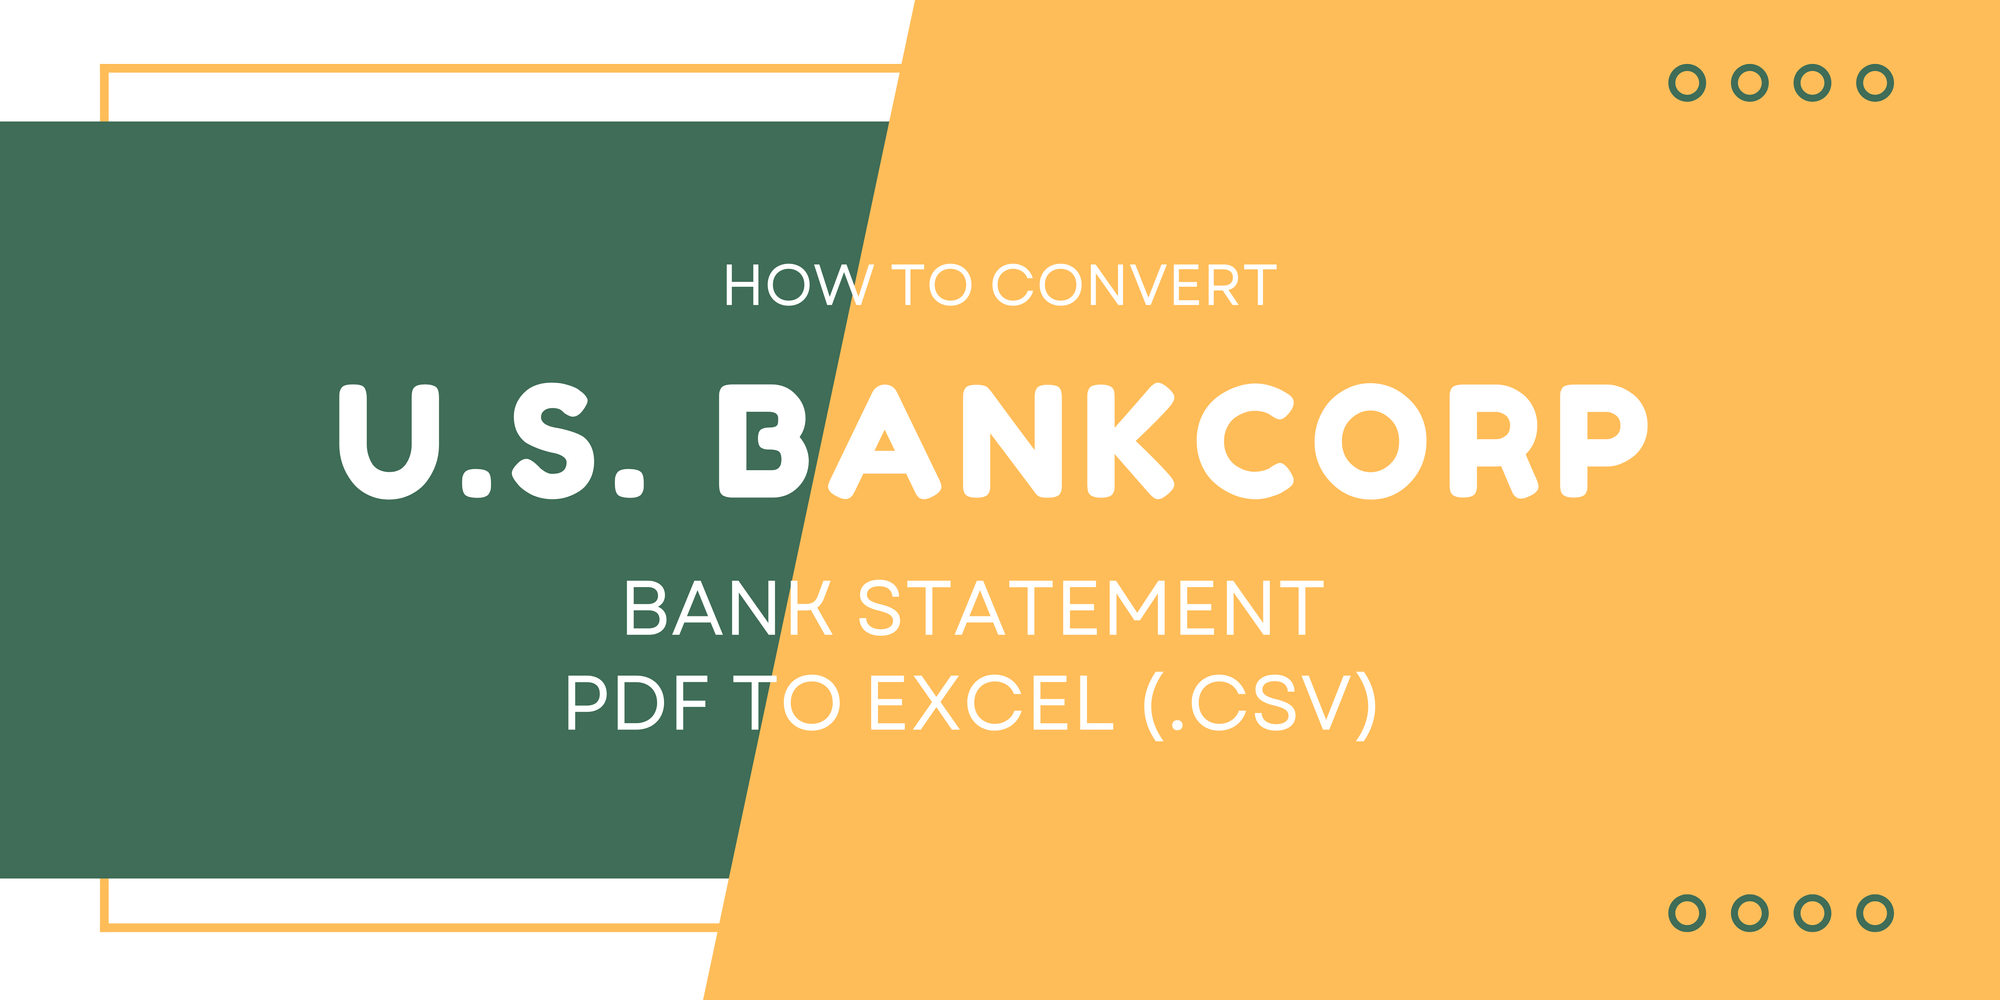 How to Convert U.S. Bancorp Bank Statement PDF to Excel or CSV